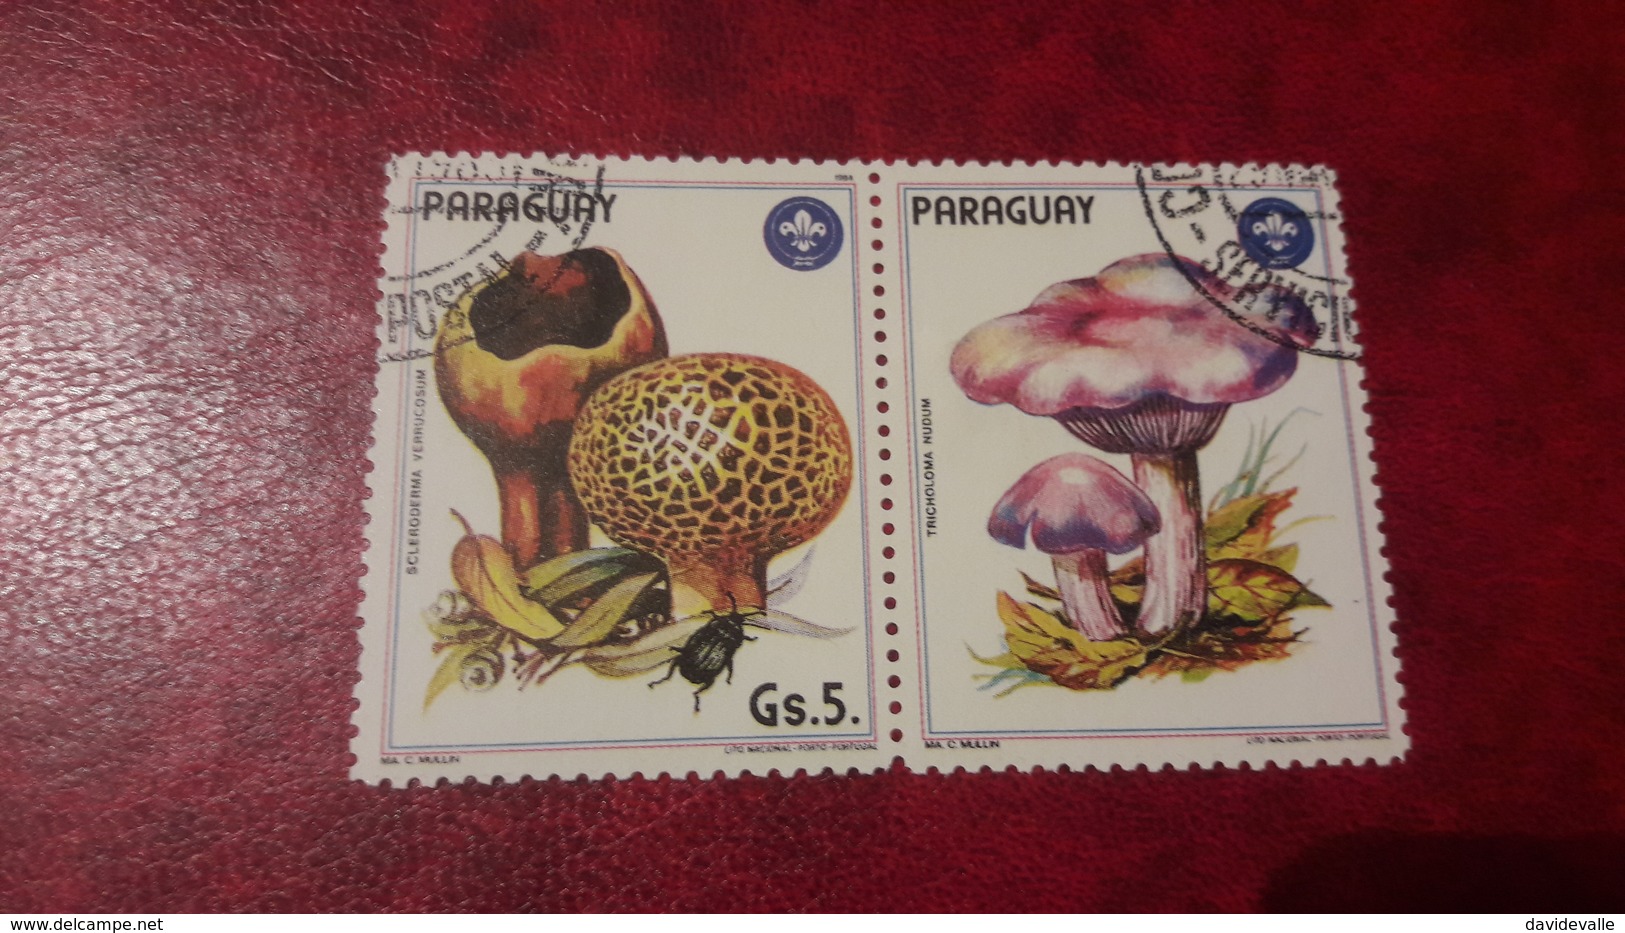 1985 Funghi - Paraguay